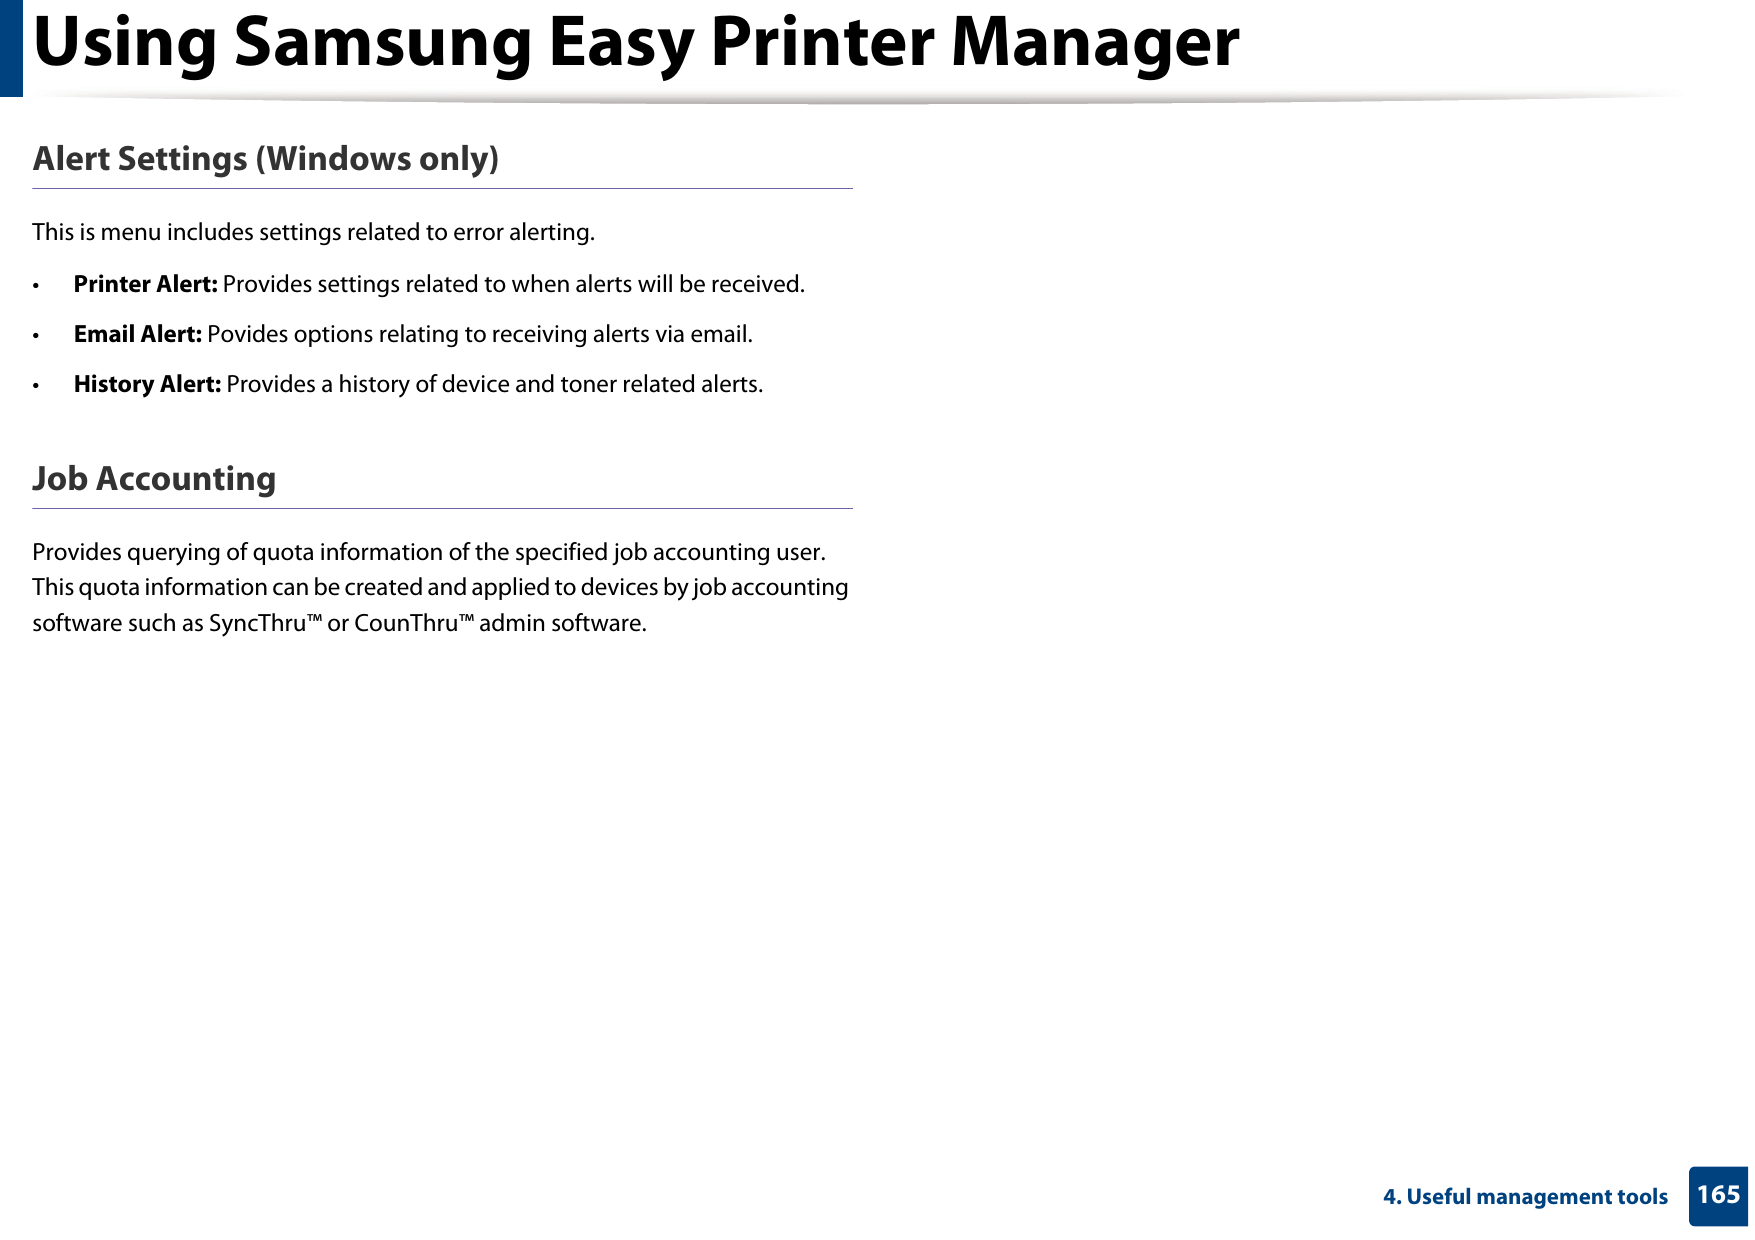 Using Samsung Easy Printer Manager1654. Useful management toolsAlert Settings (Windows only)This is menu includes settings related to error alerting. •Printer Alert: Provides settings related to when alerts will be received.•Email Alert: Povides options relating to receiving alerts via email.•History Alert: Provides a history of device and toner related alerts.Job AccountingProvides querying of quota information of the specified job accounting user. This quota information can be created and applied to devices by job accounting software such as SyncThru™ or CounThru™ admin software.